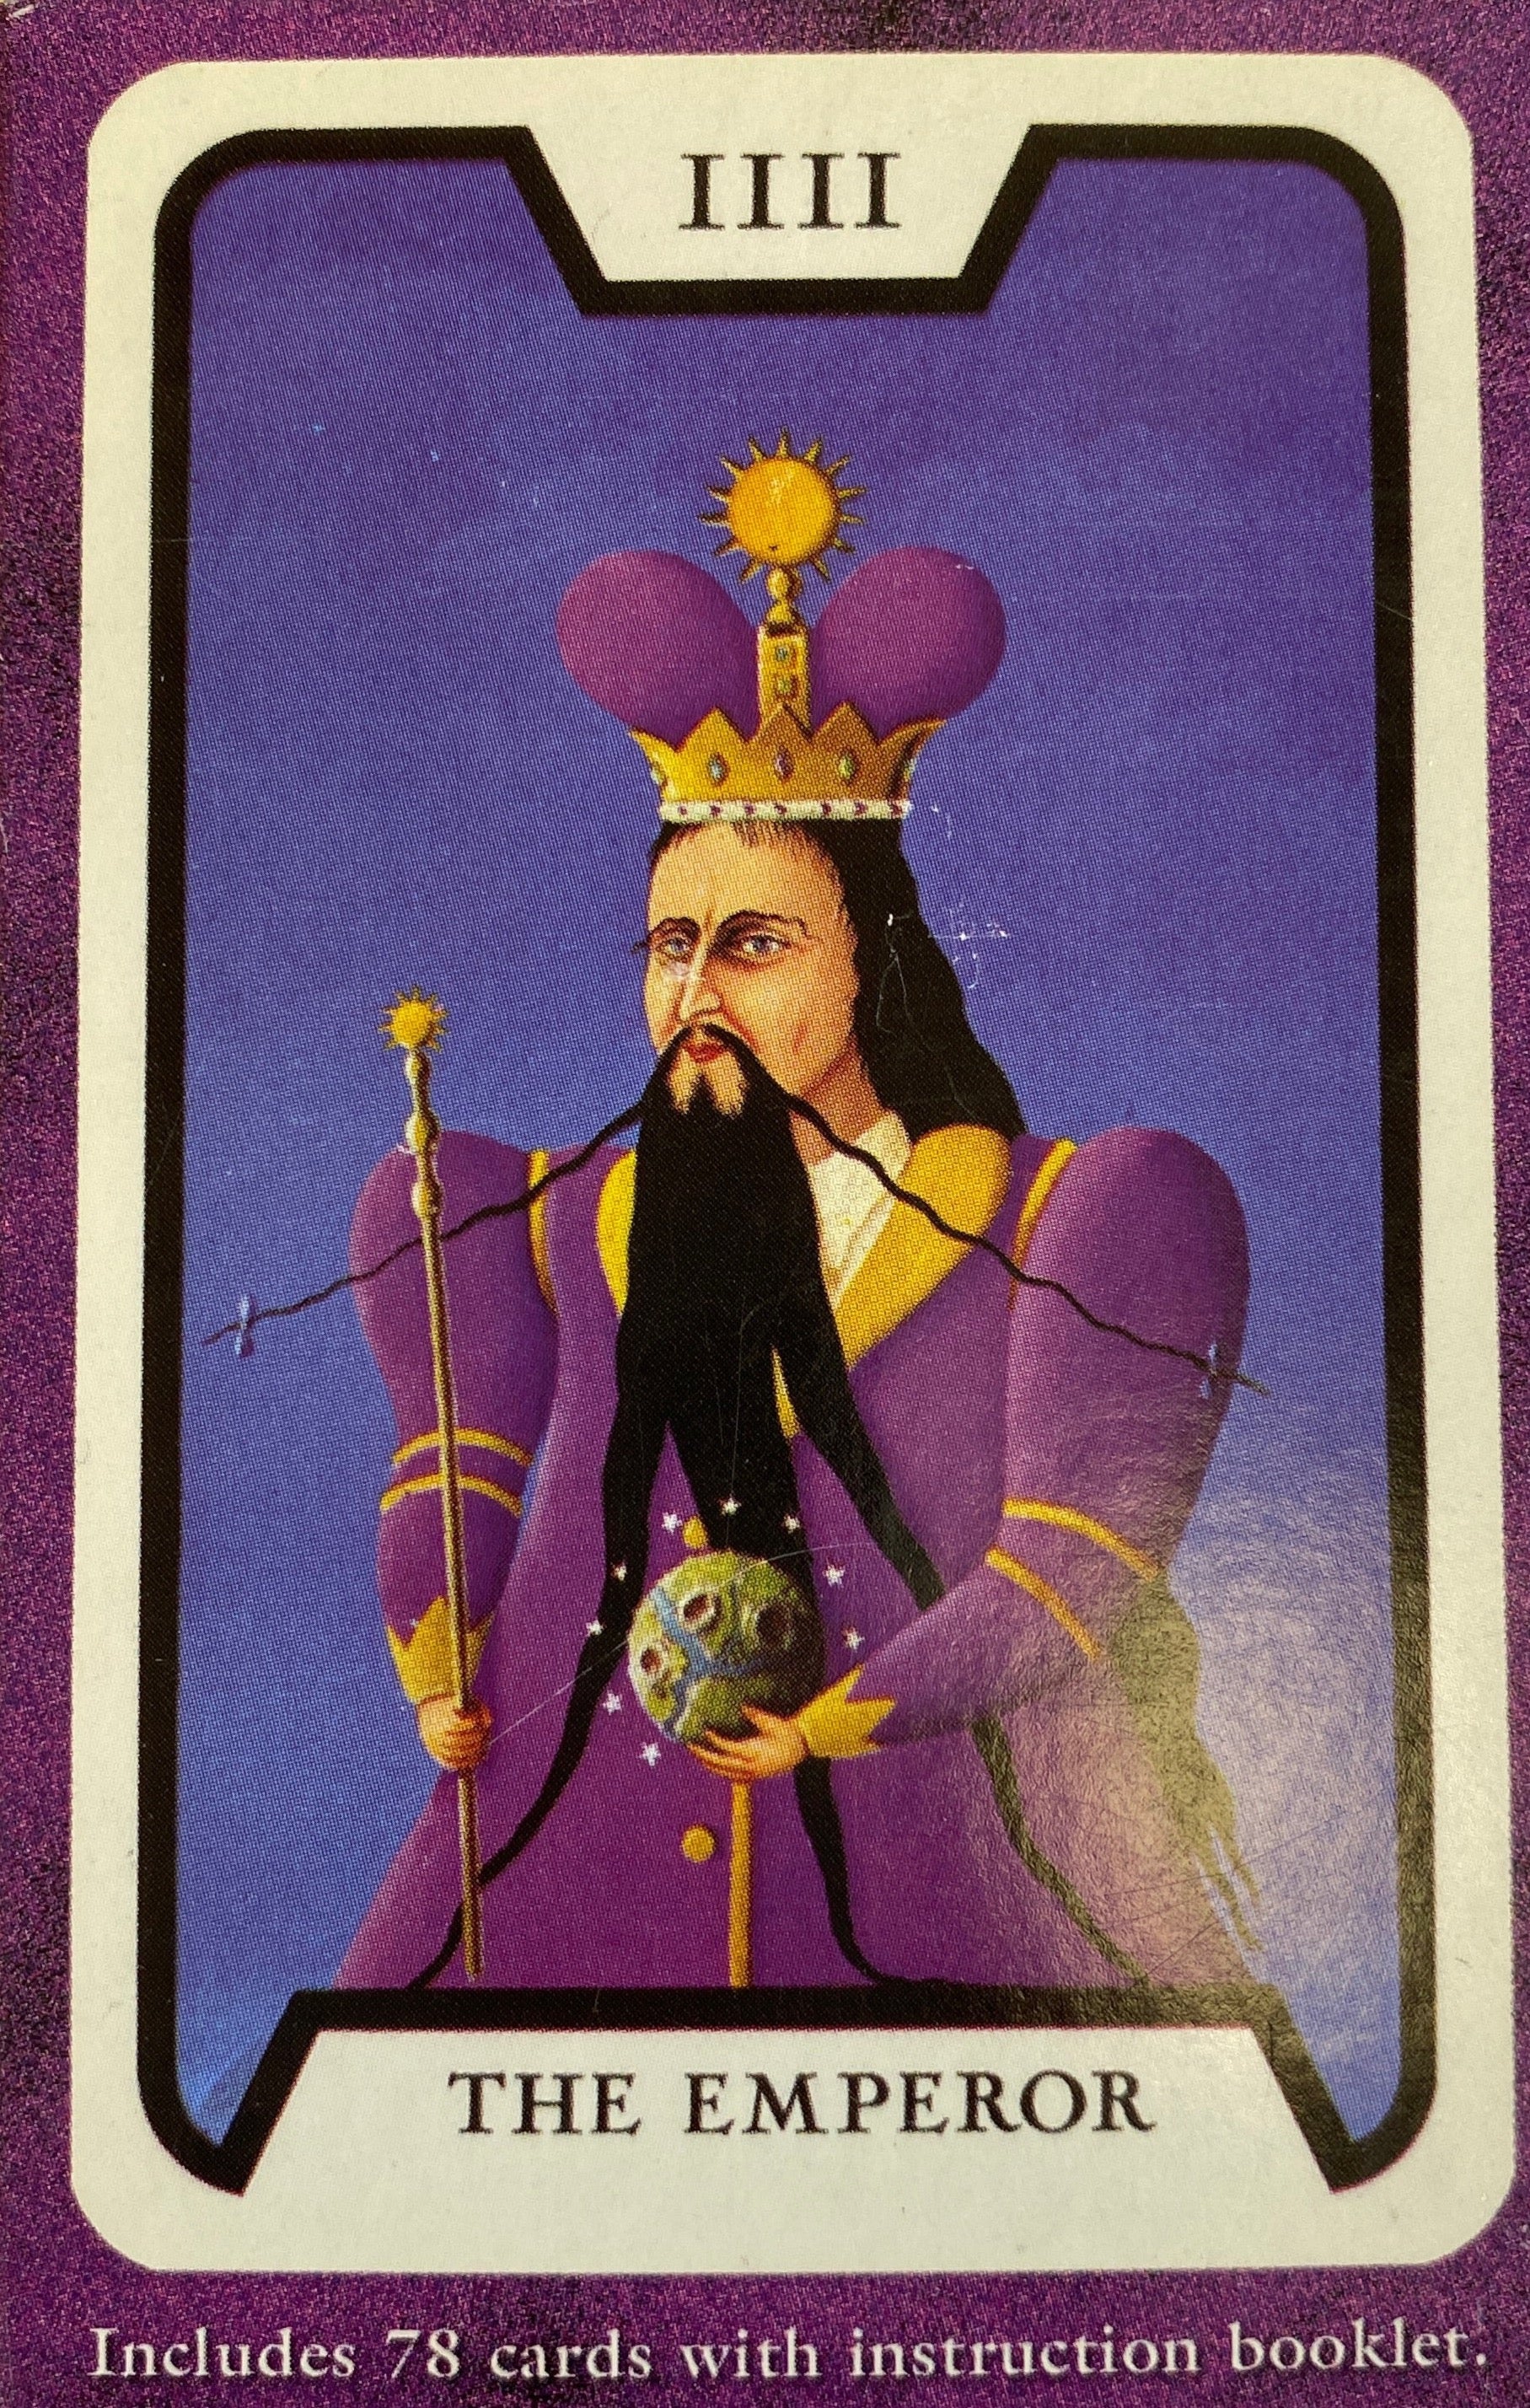 Back of box is purple with an image of king in robes 